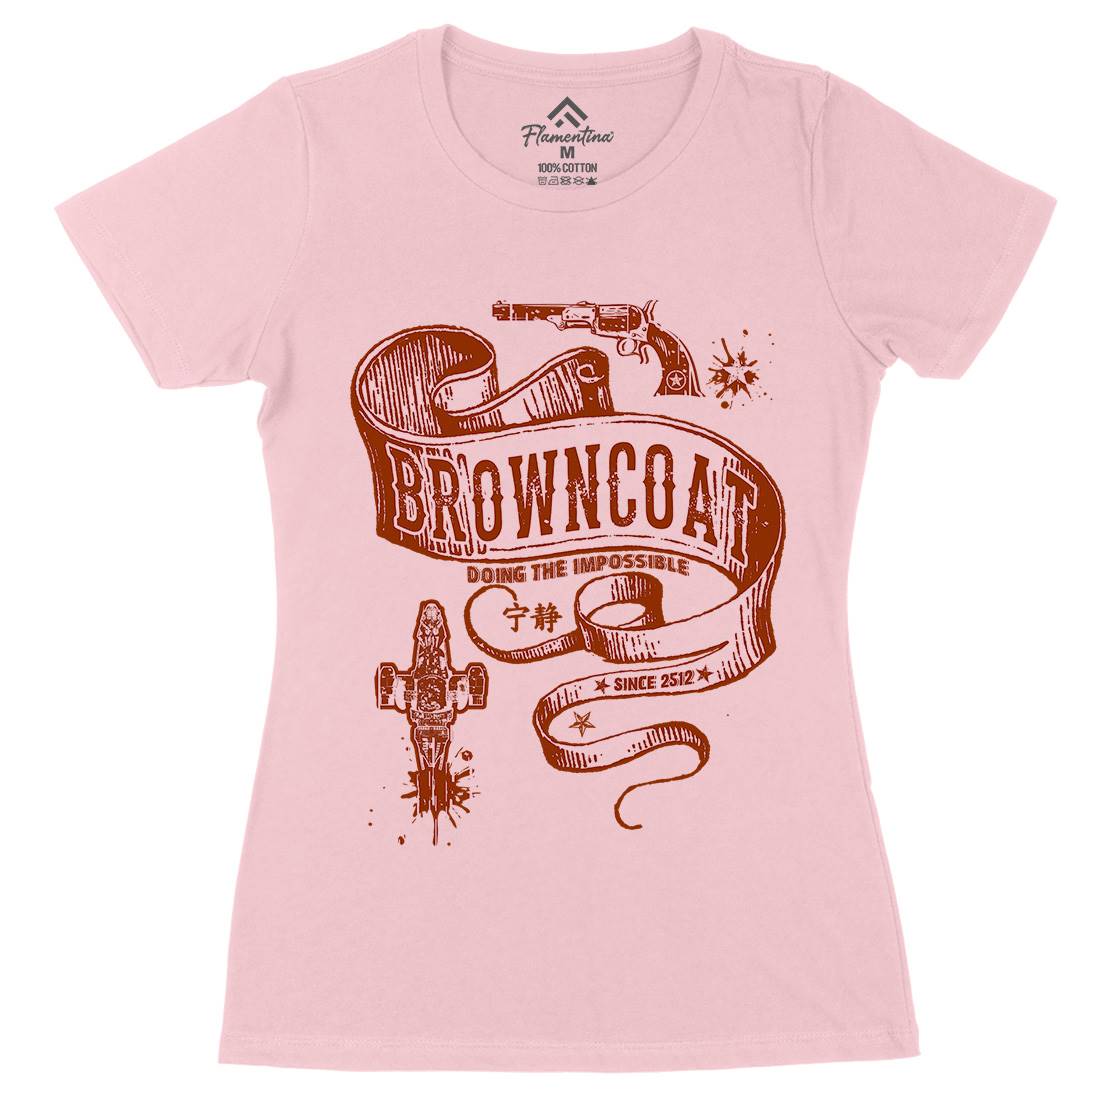 Browncoat Womens Organic Crew Neck T-Shirt Space D283